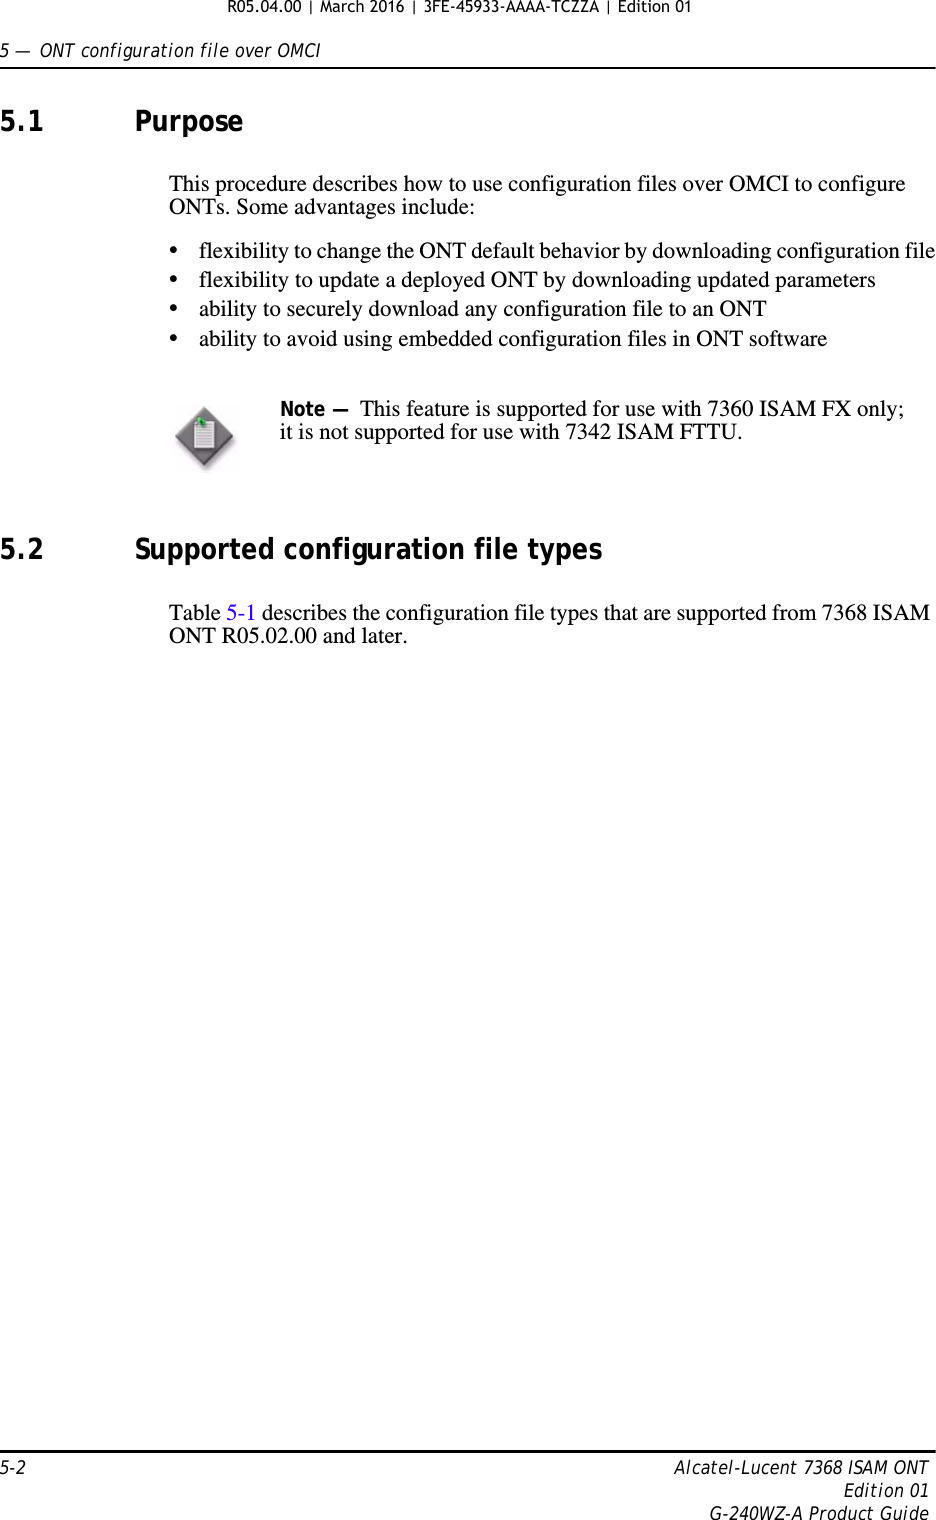 5 —  ONT configuration file over OMCI5-2 Alcatel-Lucent 7368 ISAM ONTEdition 01G-240WZ-A Product Guide5.1 PurposeThis procedure describes how to use configuration files over OMCI to configure ONTs. Some advantages include:•flexibility to change the ONT default behavior by downloading configuration file•flexibility to update a deployed ONT by downloading updated parameters•ability to securely download any configuration file to an ONT•ability to avoid using embedded configuration files in ONT software5.2 Supported configuration file typesTable 5-1 describes the configuration file types that are supported from 7368 ISAM ONT R05.02.00 and later. Note —  This feature is supported for use with 7360 ISAM FX only; it is not supported for use with 7342 ISAM FTTU.R05.04.00 | March 2016 | 3FE-45933-AAAA-TCZZA | Edition 01 